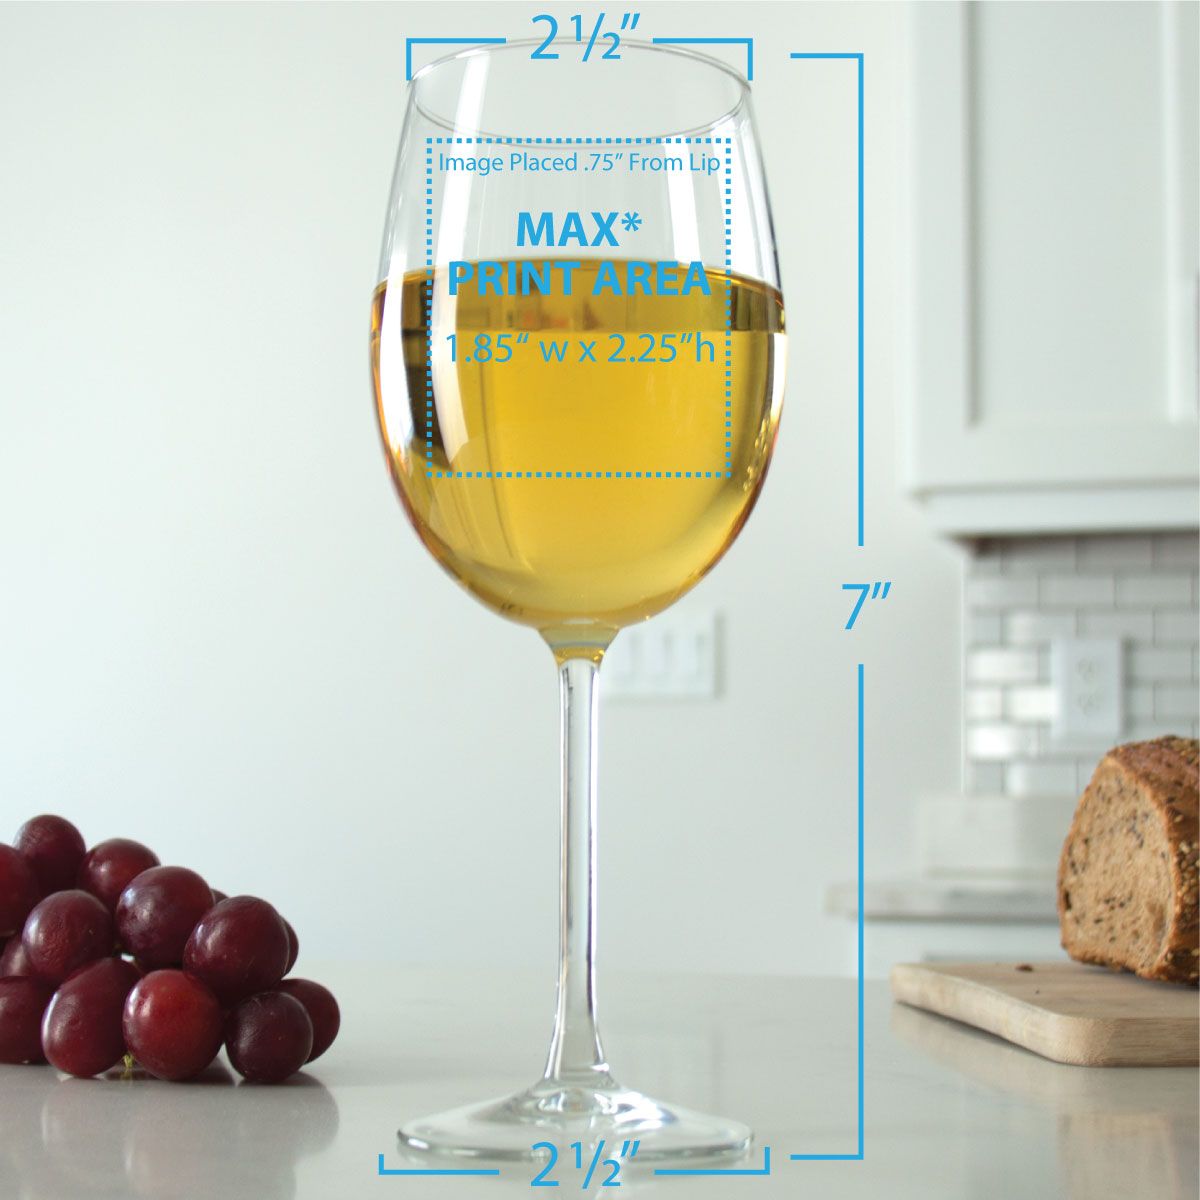 Wine Glasses - Glassware - Promotional Products - Custom Gifts - Party  Favors - Corporate Gifts - Personalized Gifts